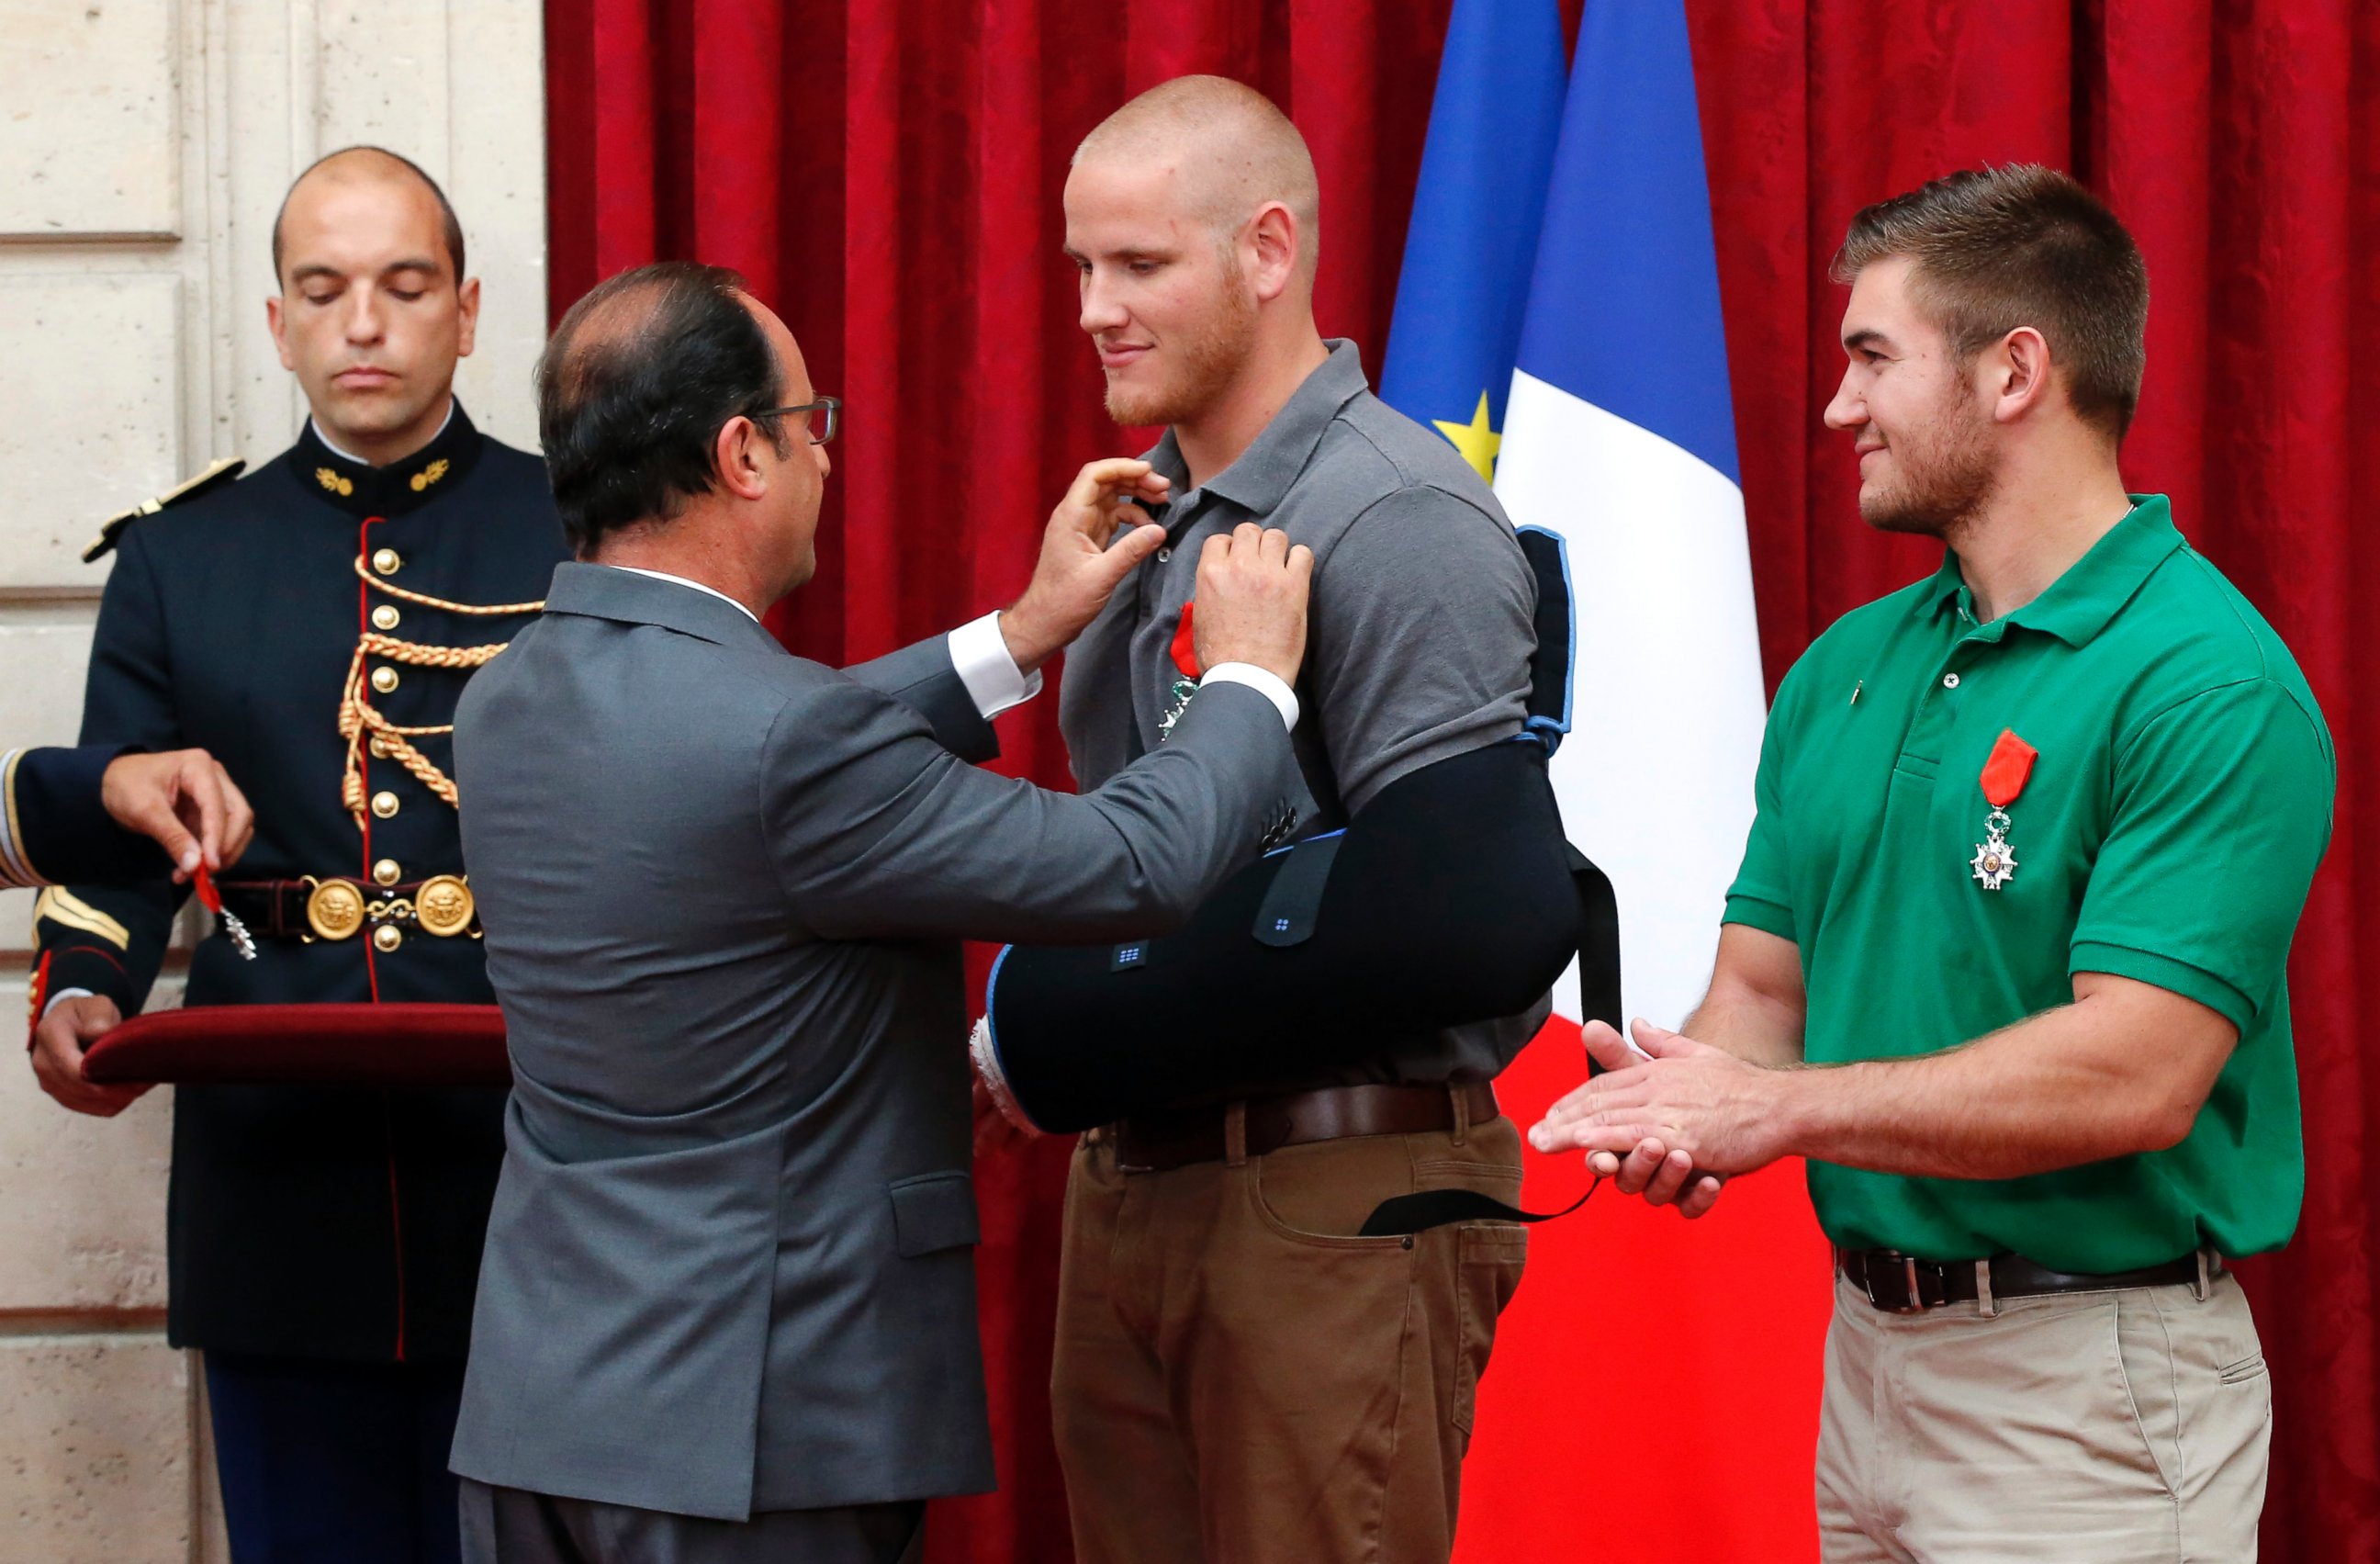 PHOTO: French President Francois Hollande awards U.S. Airman Spencer Stone while Alek Skarlatos applauds at the Elysee Palace, Aug.24, 2015 in Paris.